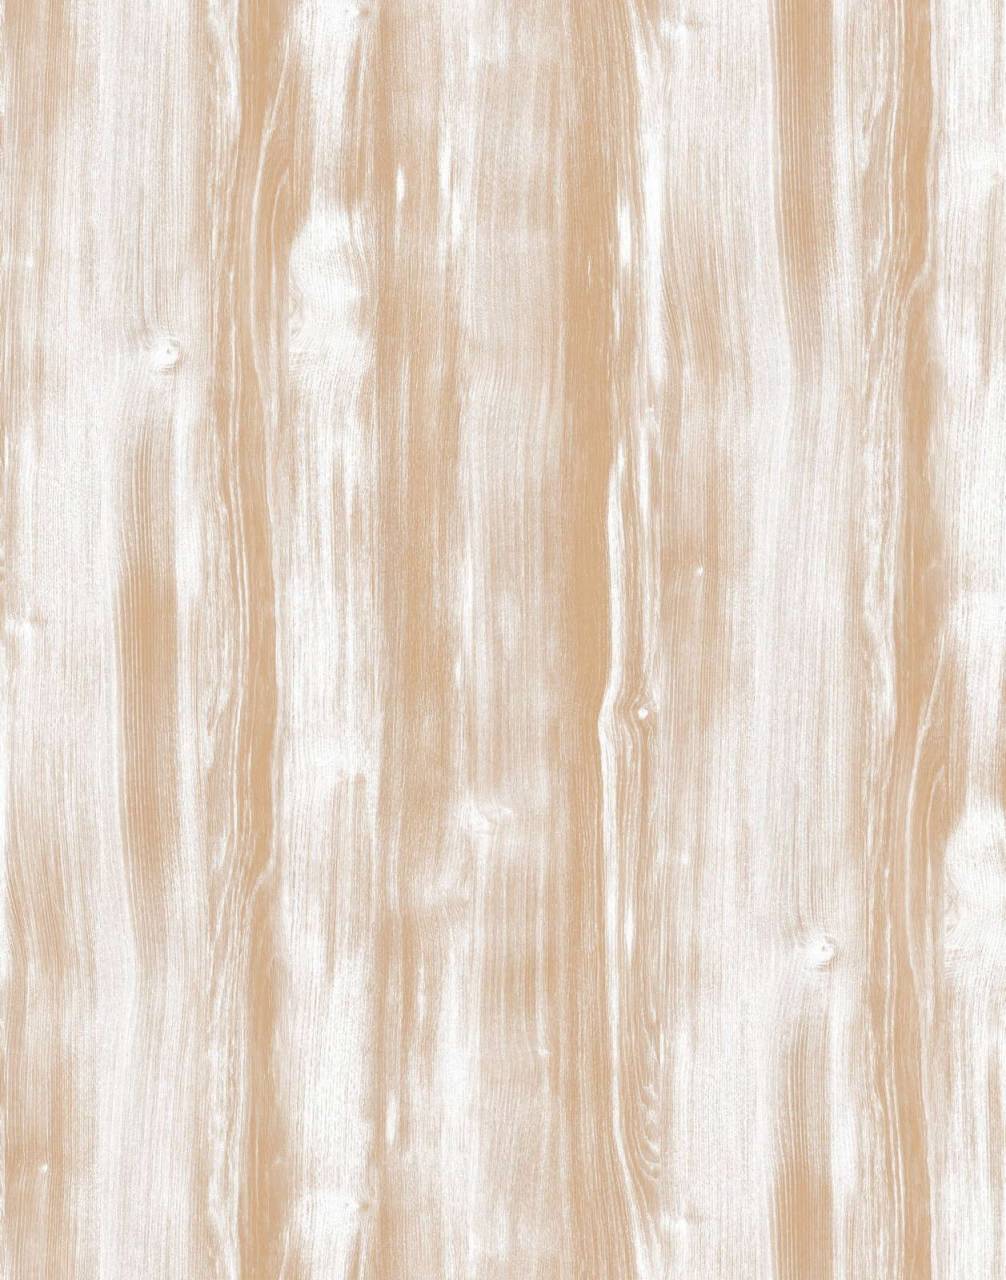 Close-up of K535 Gold Baroque Oak sample, featuring luxurious gold tones and intricate wood grain patterns.